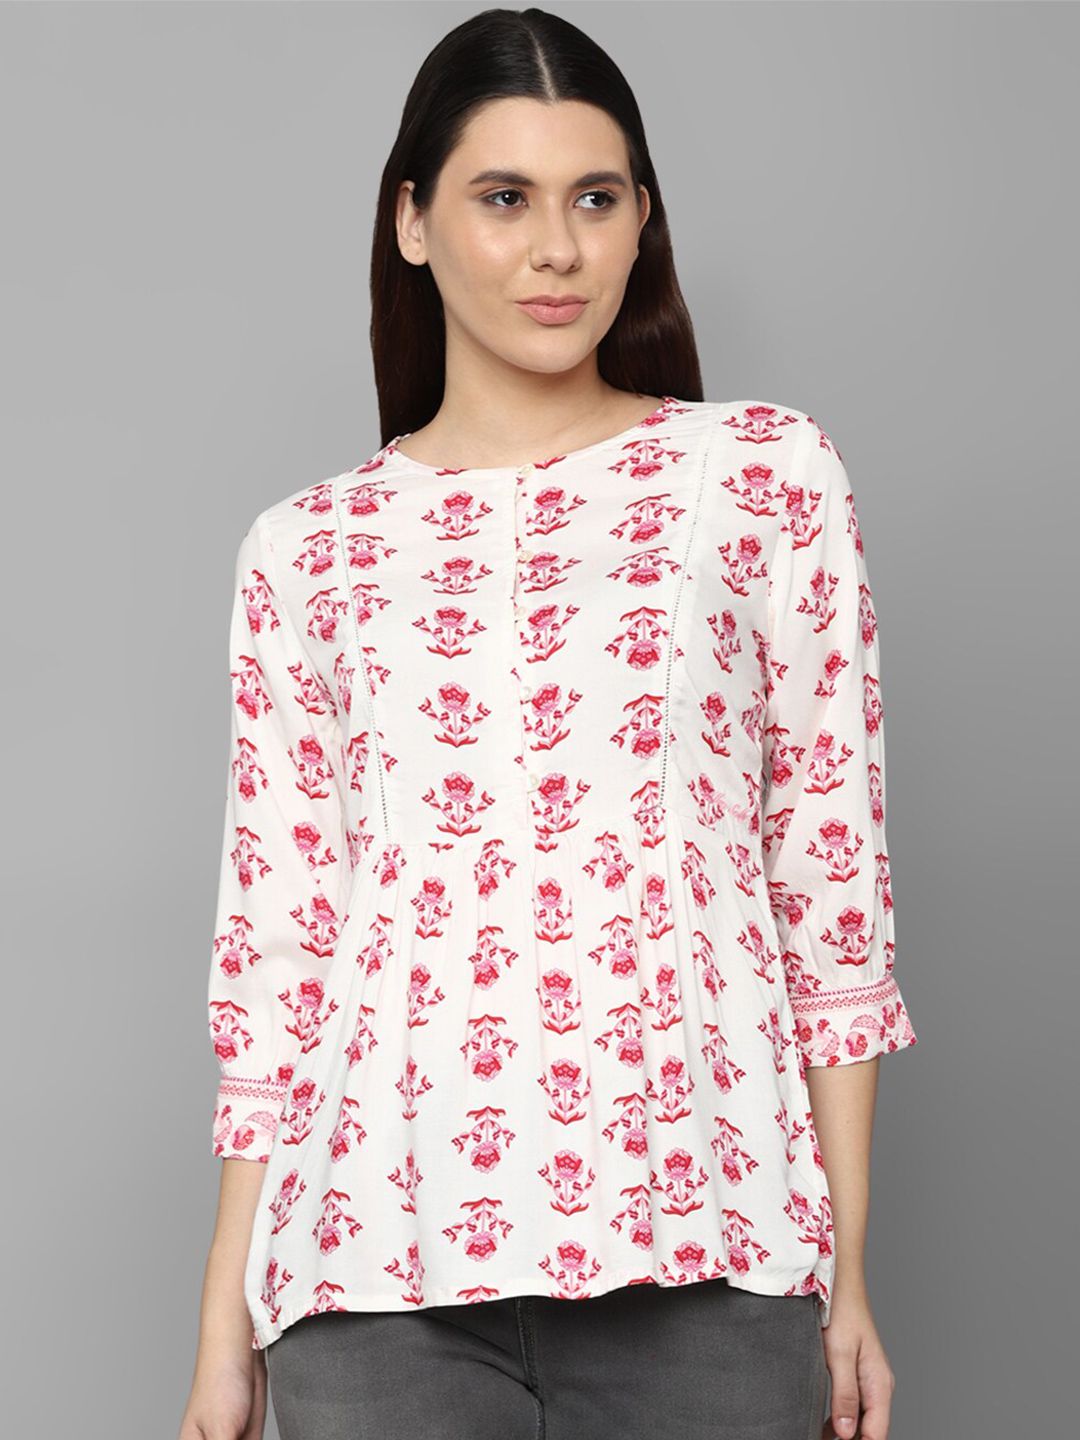 Allen Solly Woman White Floral Print Top Price in India